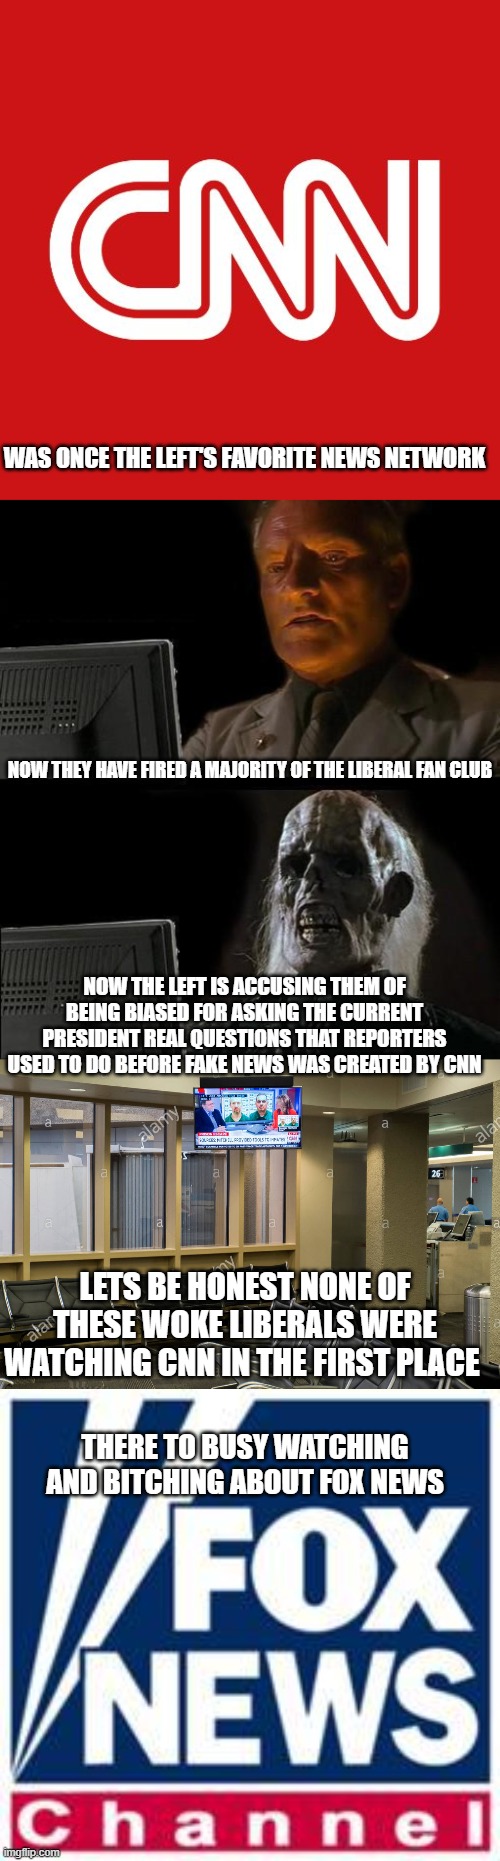 the left is losing it! | WAS ONCE THE LEFT'S FAVORITE NEWS NETWORK; NOW THEY HAVE FIRED A MAJORITY OF THE LIBERAL FAN CLUB; NOW THE LEFT IS ACCUSING THEM OF BEING BIASED FOR ASKING THE CURRENT PRESIDENT REAL QUESTIONS THAT REPORTERS USED TO DO BEFORE FAKE NEWS WAS CREATED BY CNN; LETS BE HONEST NONE OF THESE WOKE LIBERALS WERE WATCHING CNN IN THE FIRST PLACE; THERE TO BUSY WATCHING AND BITCHING ABOUT FOX NEWS | image tagged in cnn,memes,i'll just wait here,cnn key viewers,fox news | made w/ Imgflip meme maker